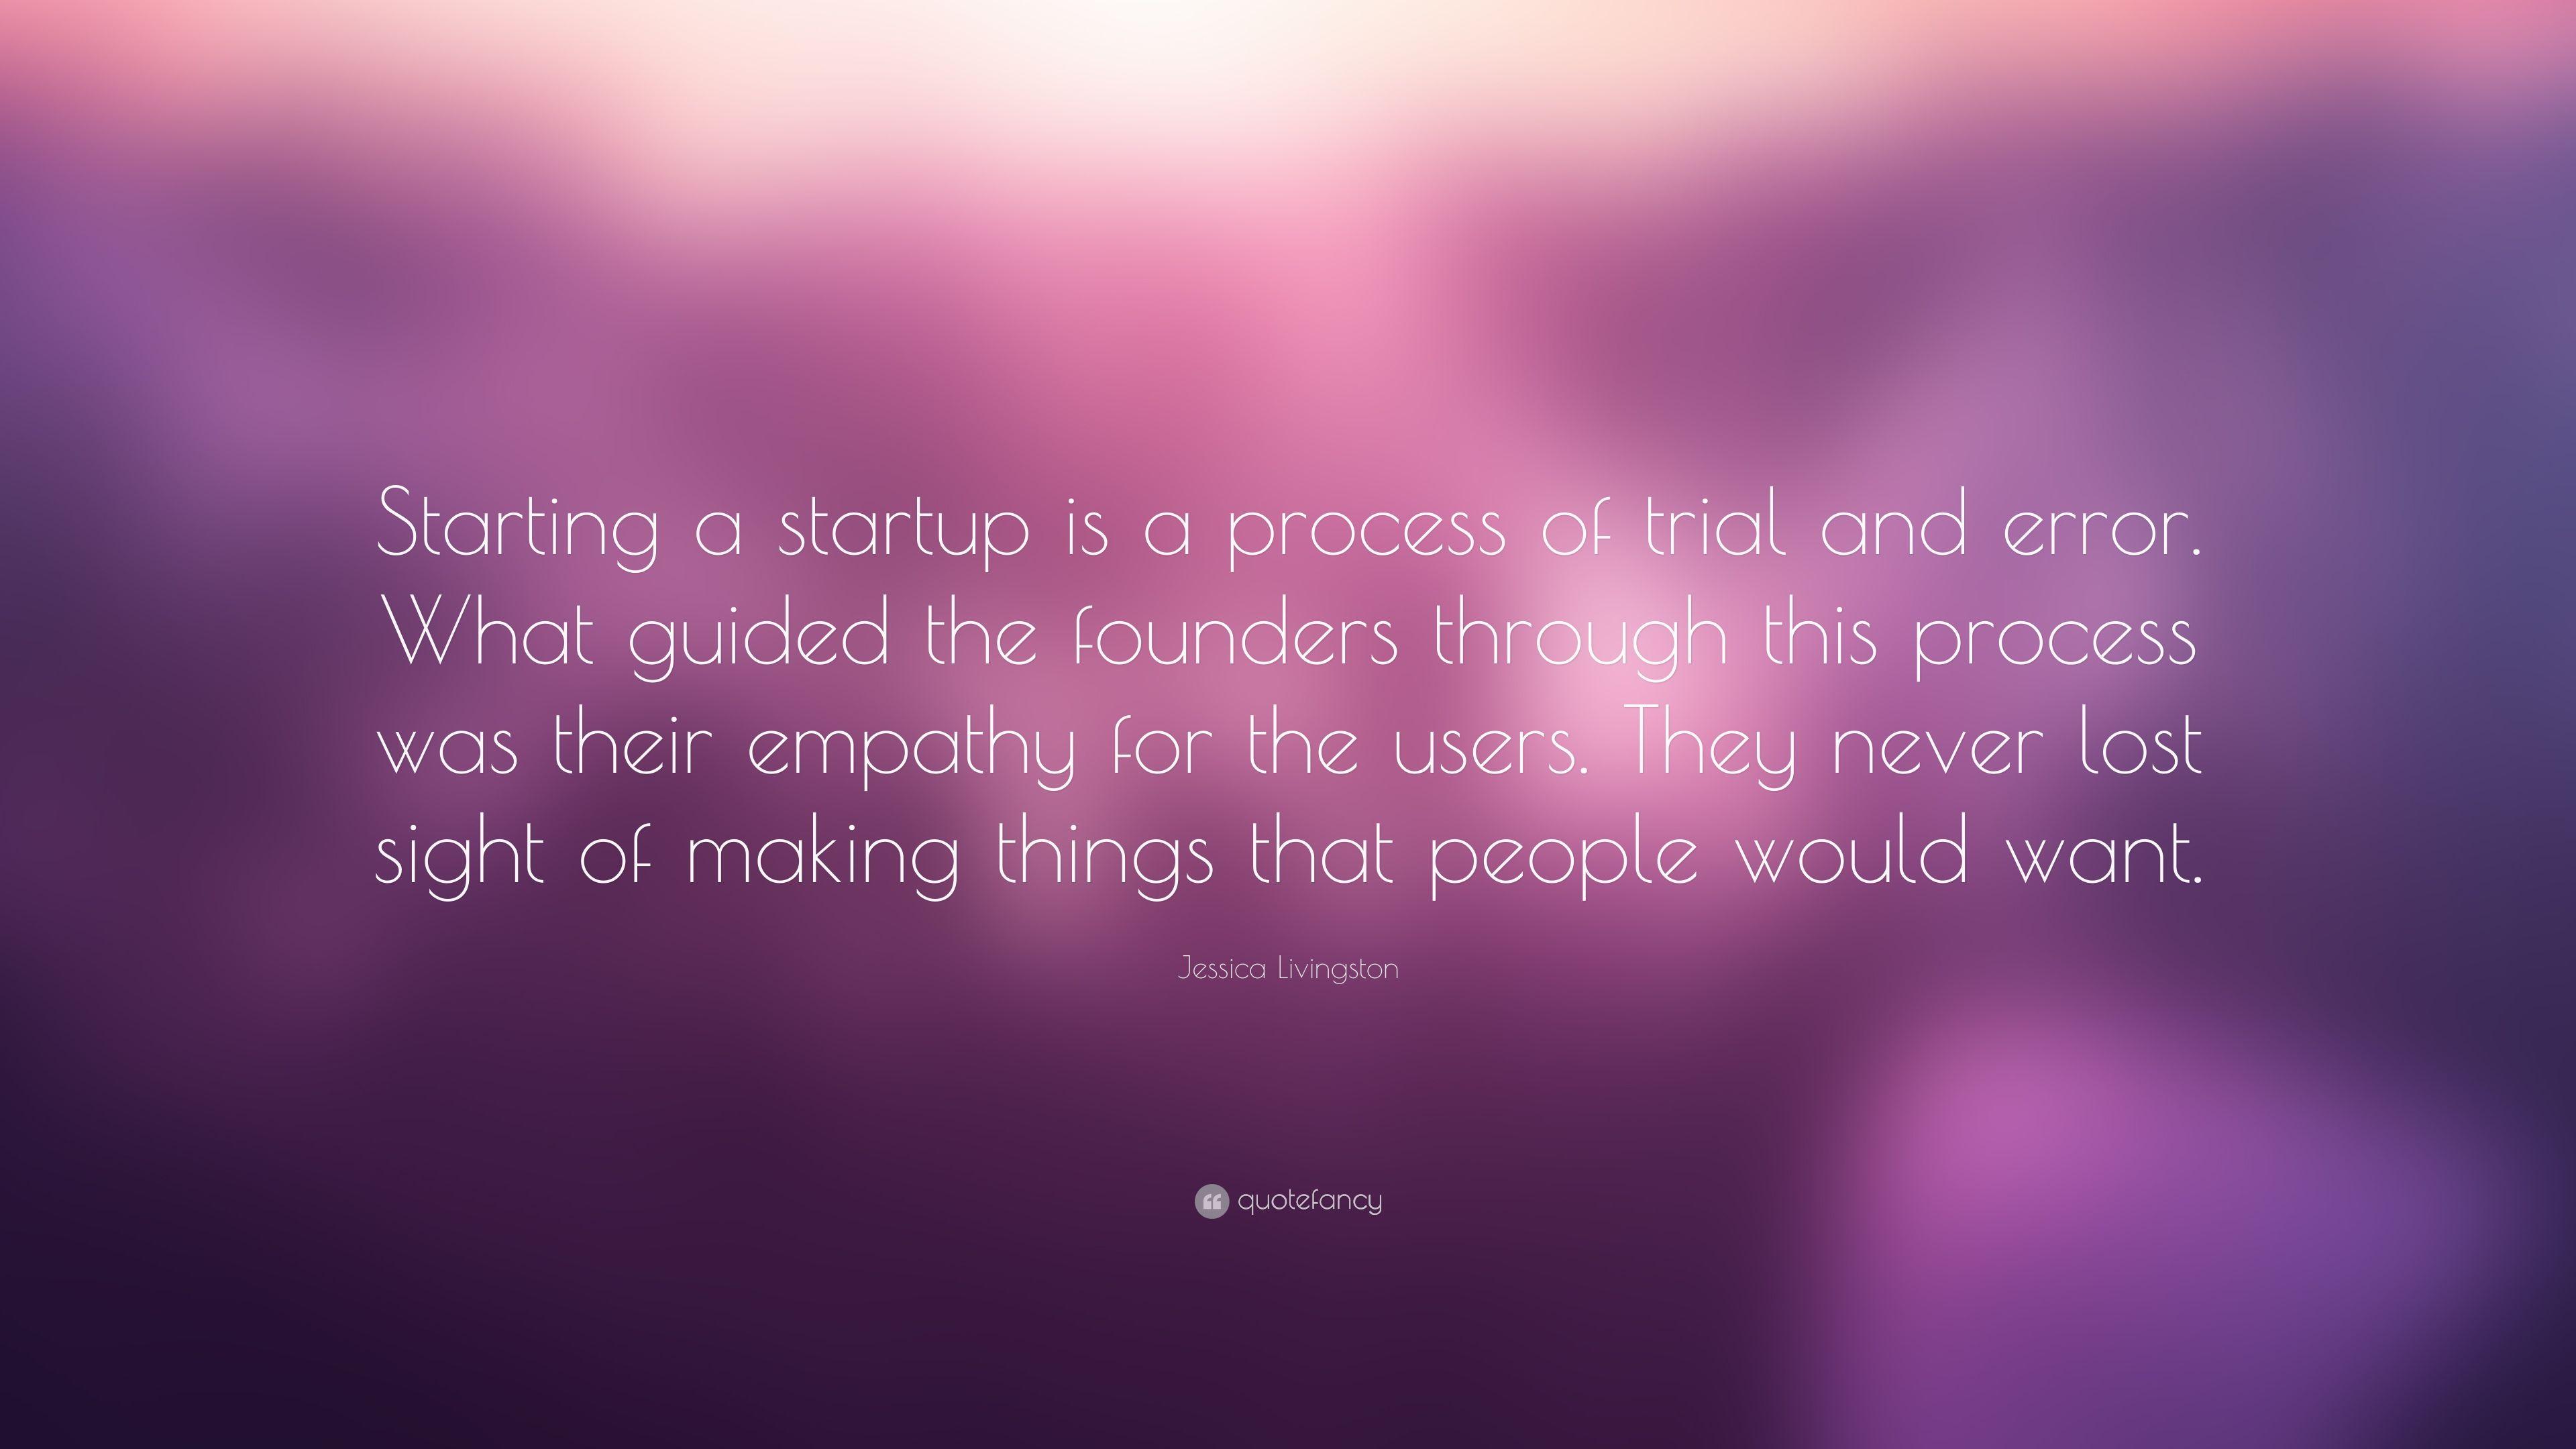 Jessica Livingston Quote: “Starting a startup is a process of trial